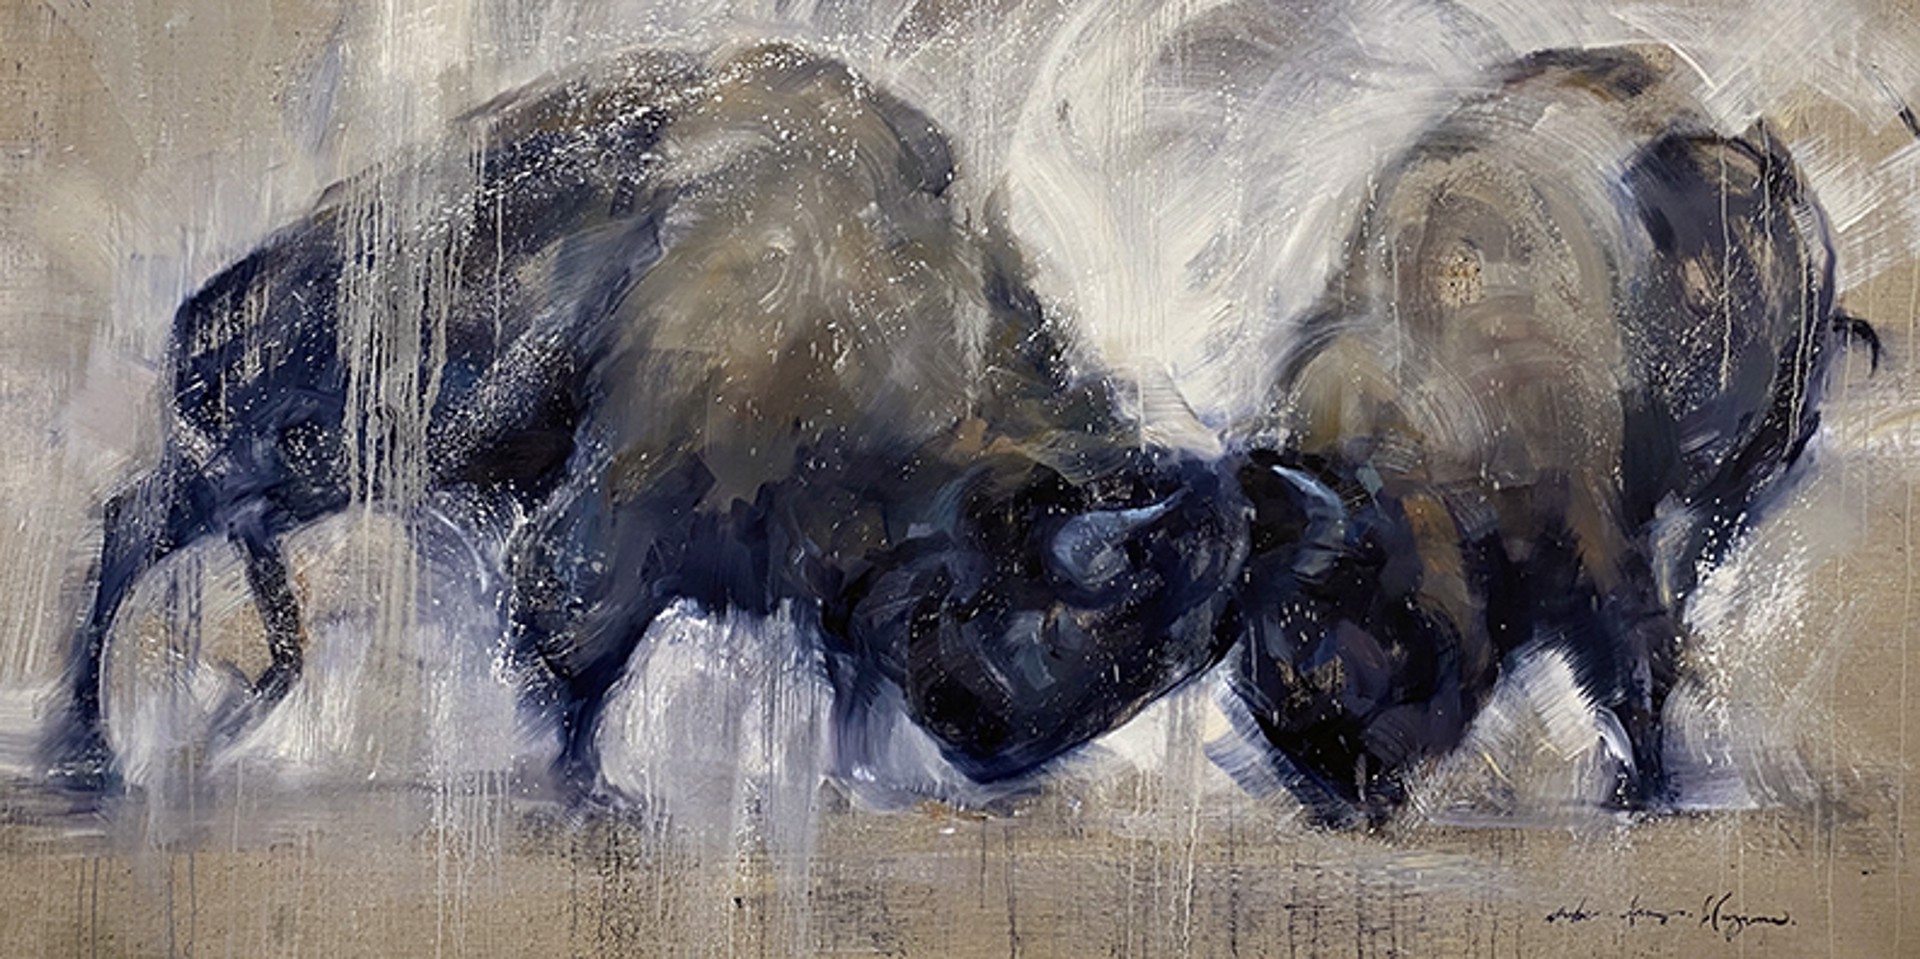 Contemporary Oil Painting Of Two Bull Bison Head Butting With A Dusty Effect And White Background By Amber Blazina, Available At Gallery Wild